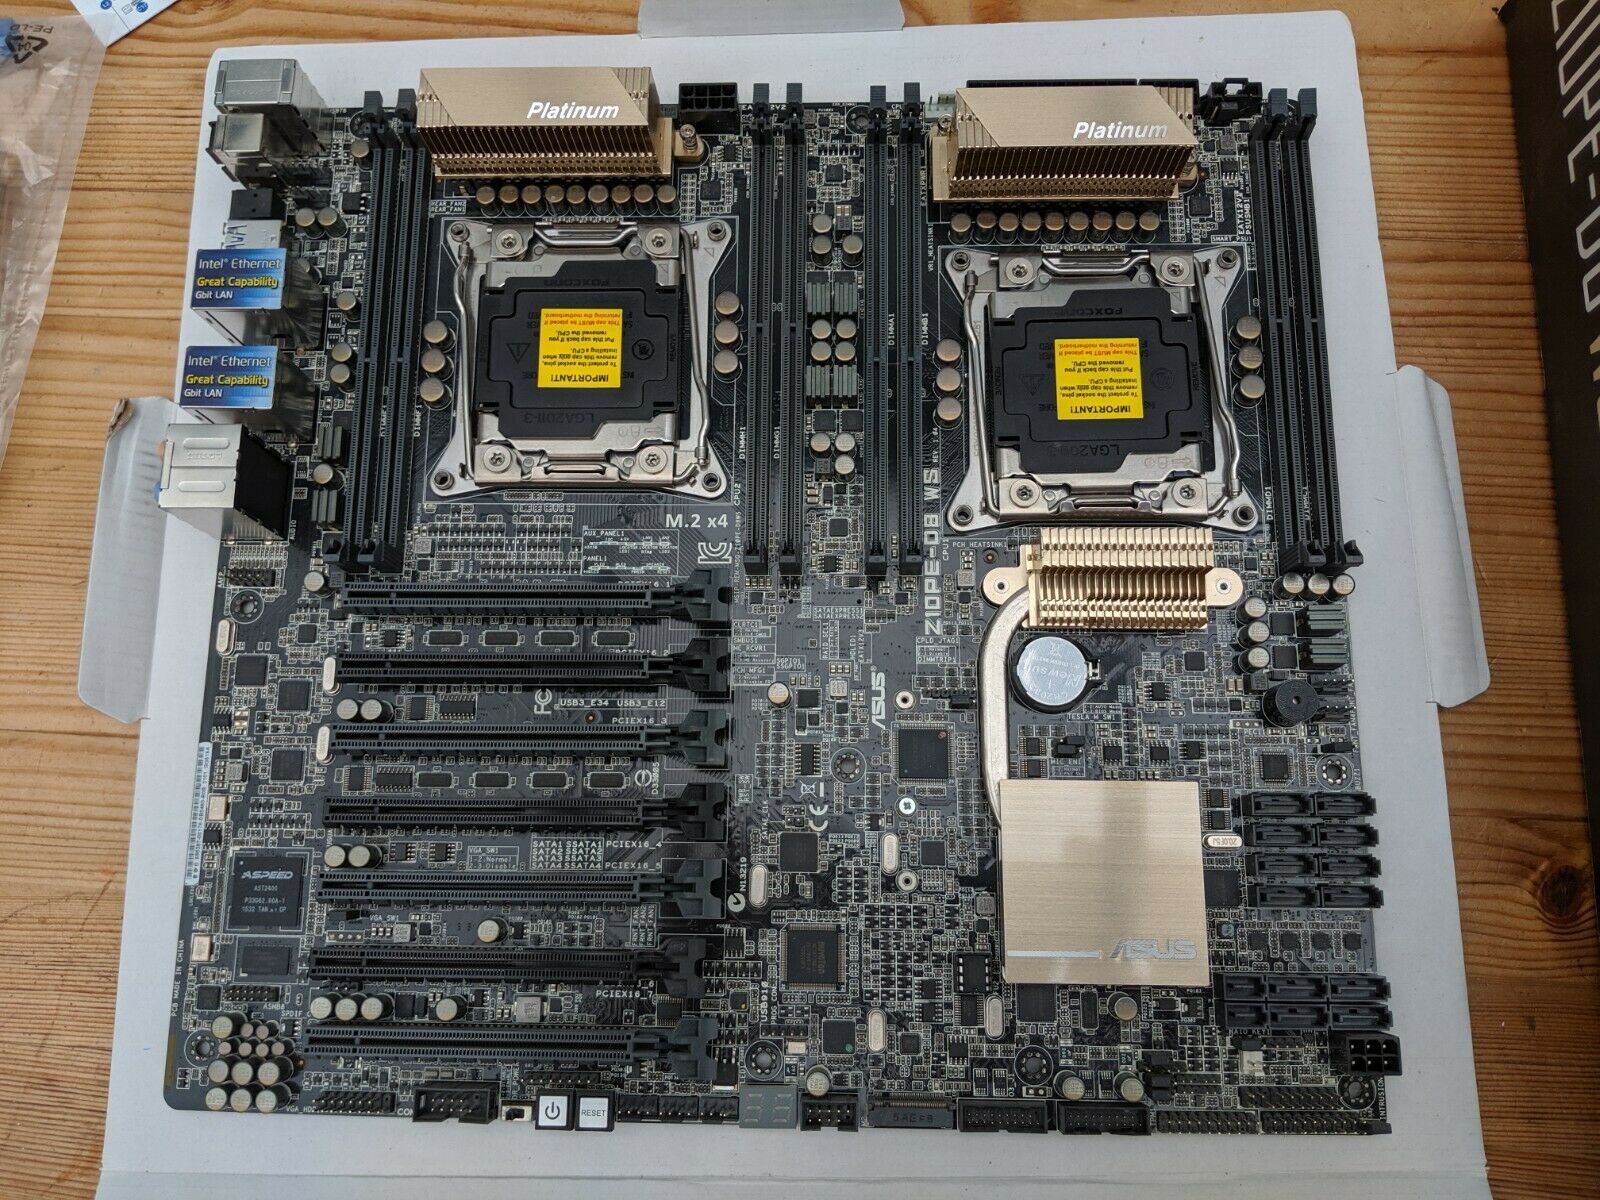 Motherboard purchased, ASUS Z10PE-D8 WS